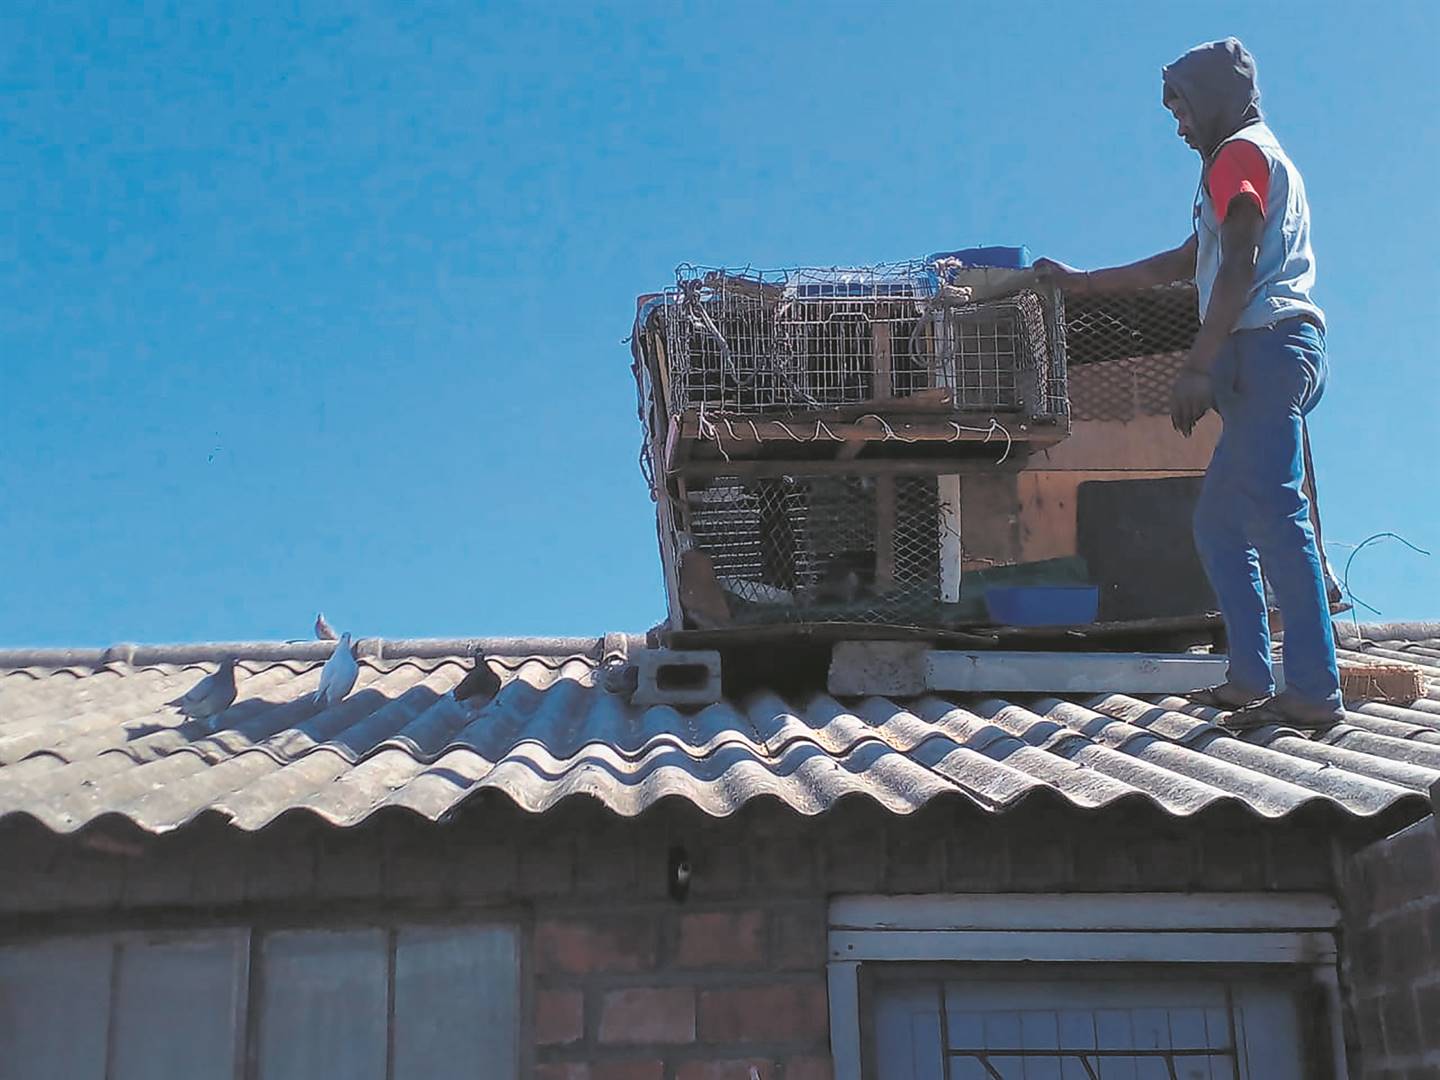 Sibulele Ndifana said he keeps his pigeons in a cage on the roof to protect them.              Photo by  Lulekwa Mbadamane